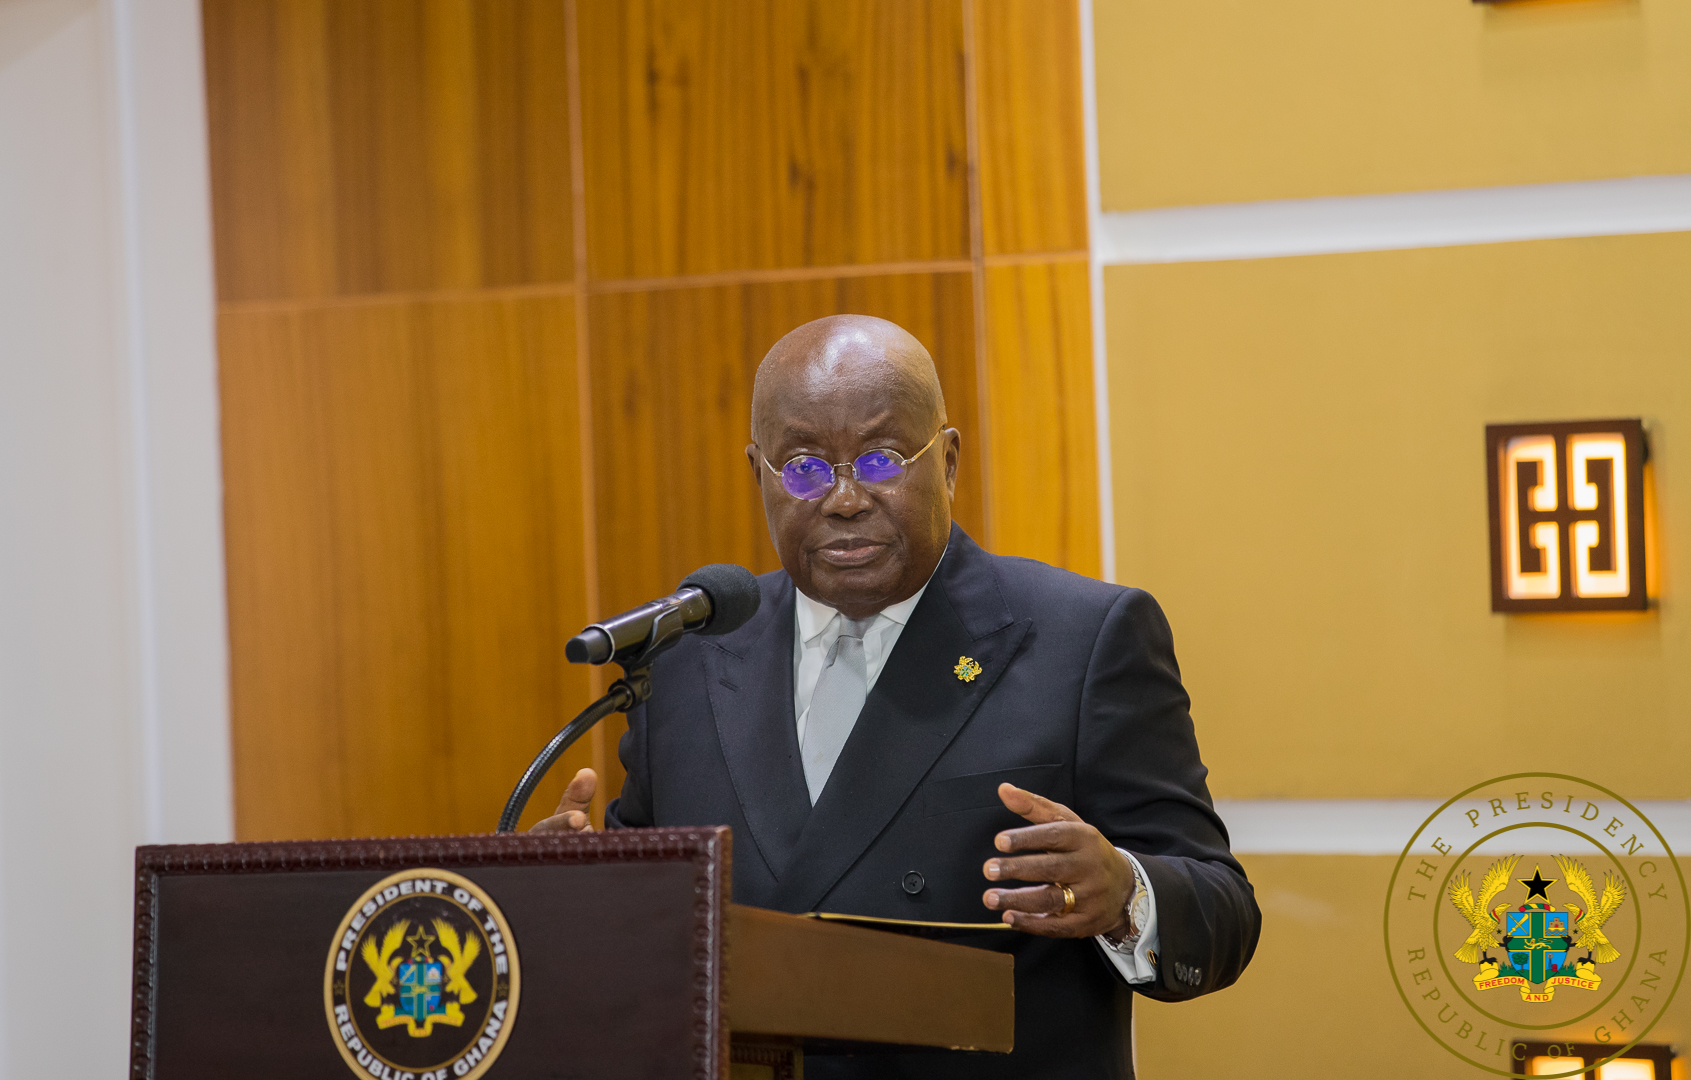 Reviewing SHS: ‘I think we should have a broader conversation about education’ - Akufo-Addo